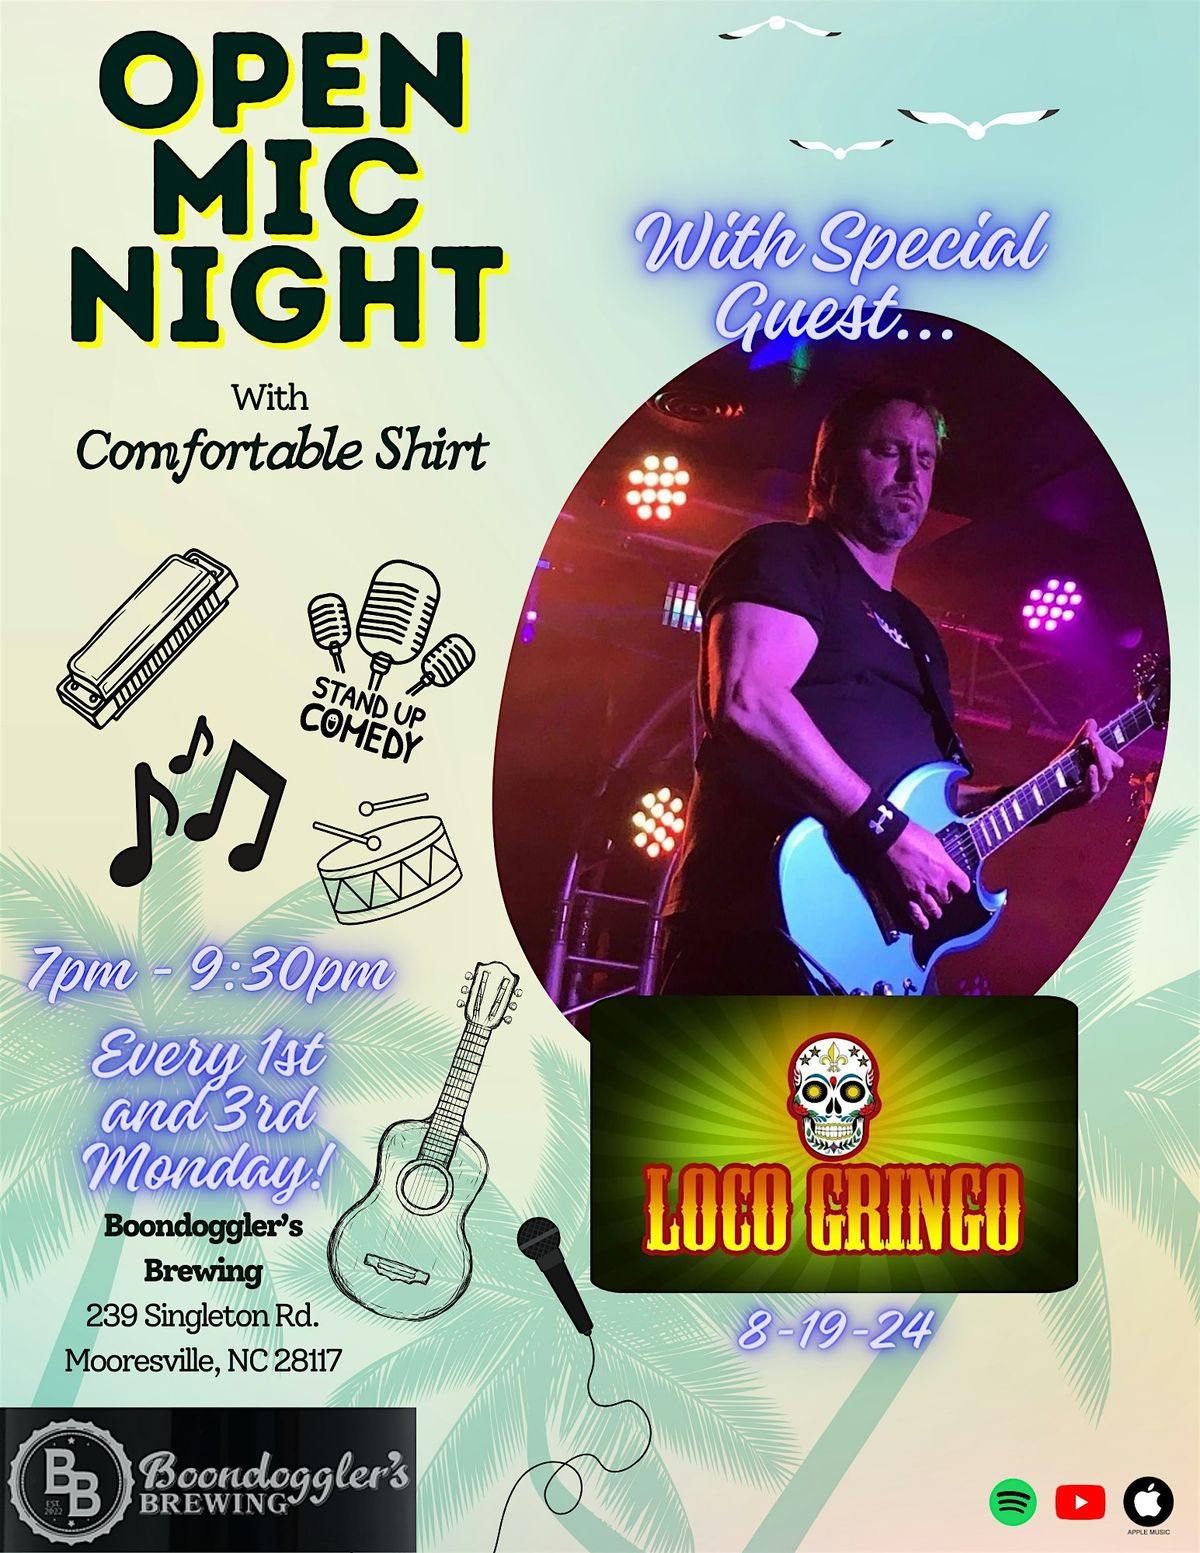 Open Mic at Boondoggler's Brewing featuring Loco Gringo!